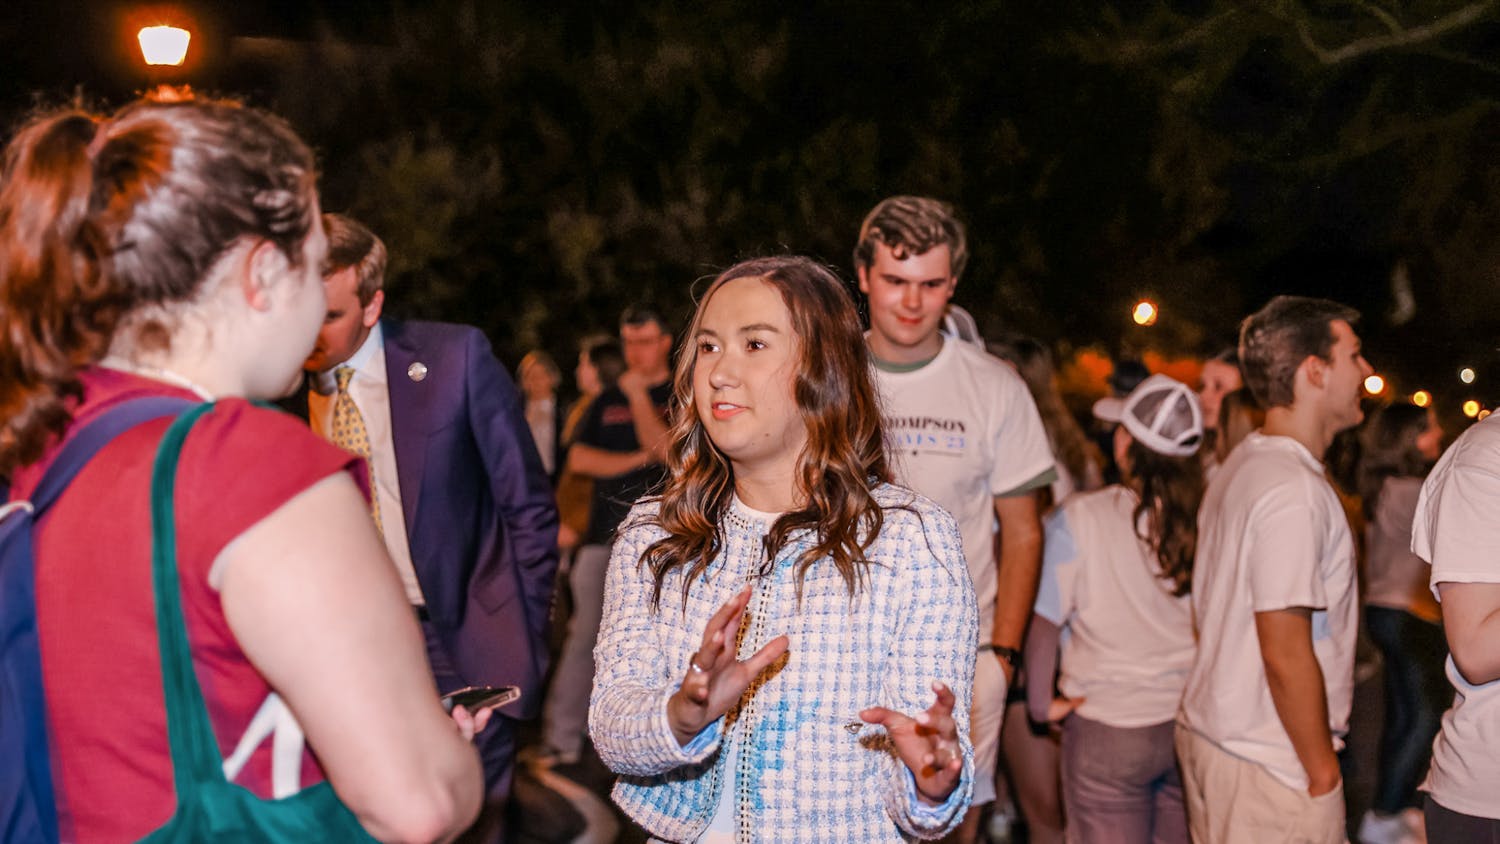 Third-year public relations student Emmie Thompson speaks to the media on Greene Street after winning the election for student body president on Feb. 22, 2023. Thompson defeated Reilly Arford in the election, one of the four executive positions announced.